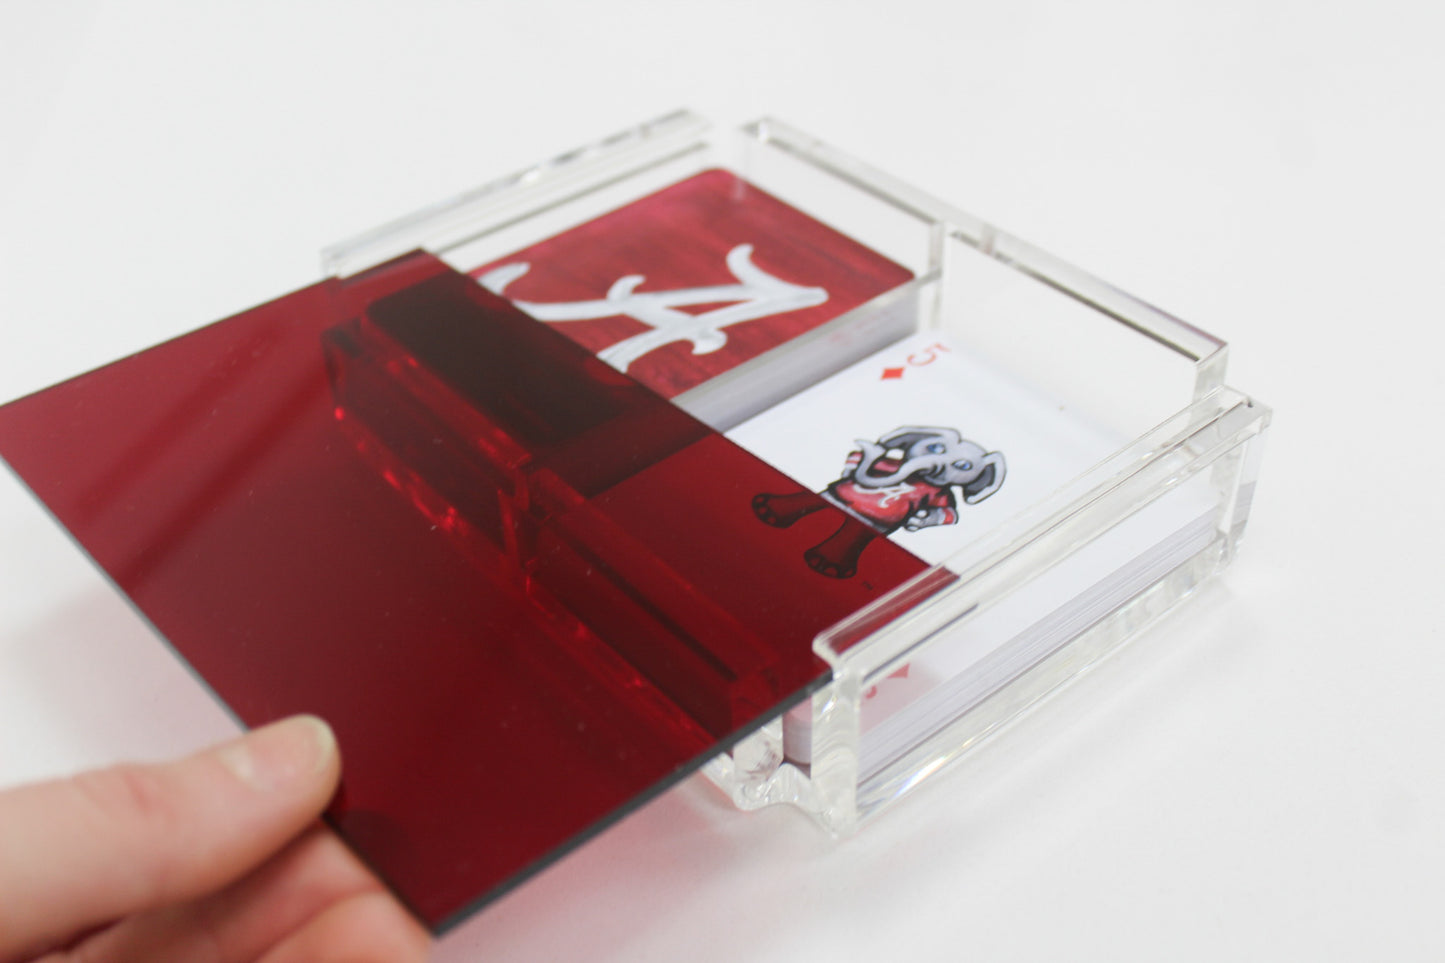 University of Alabama Playing Cards in Acrylic Playing Card Case